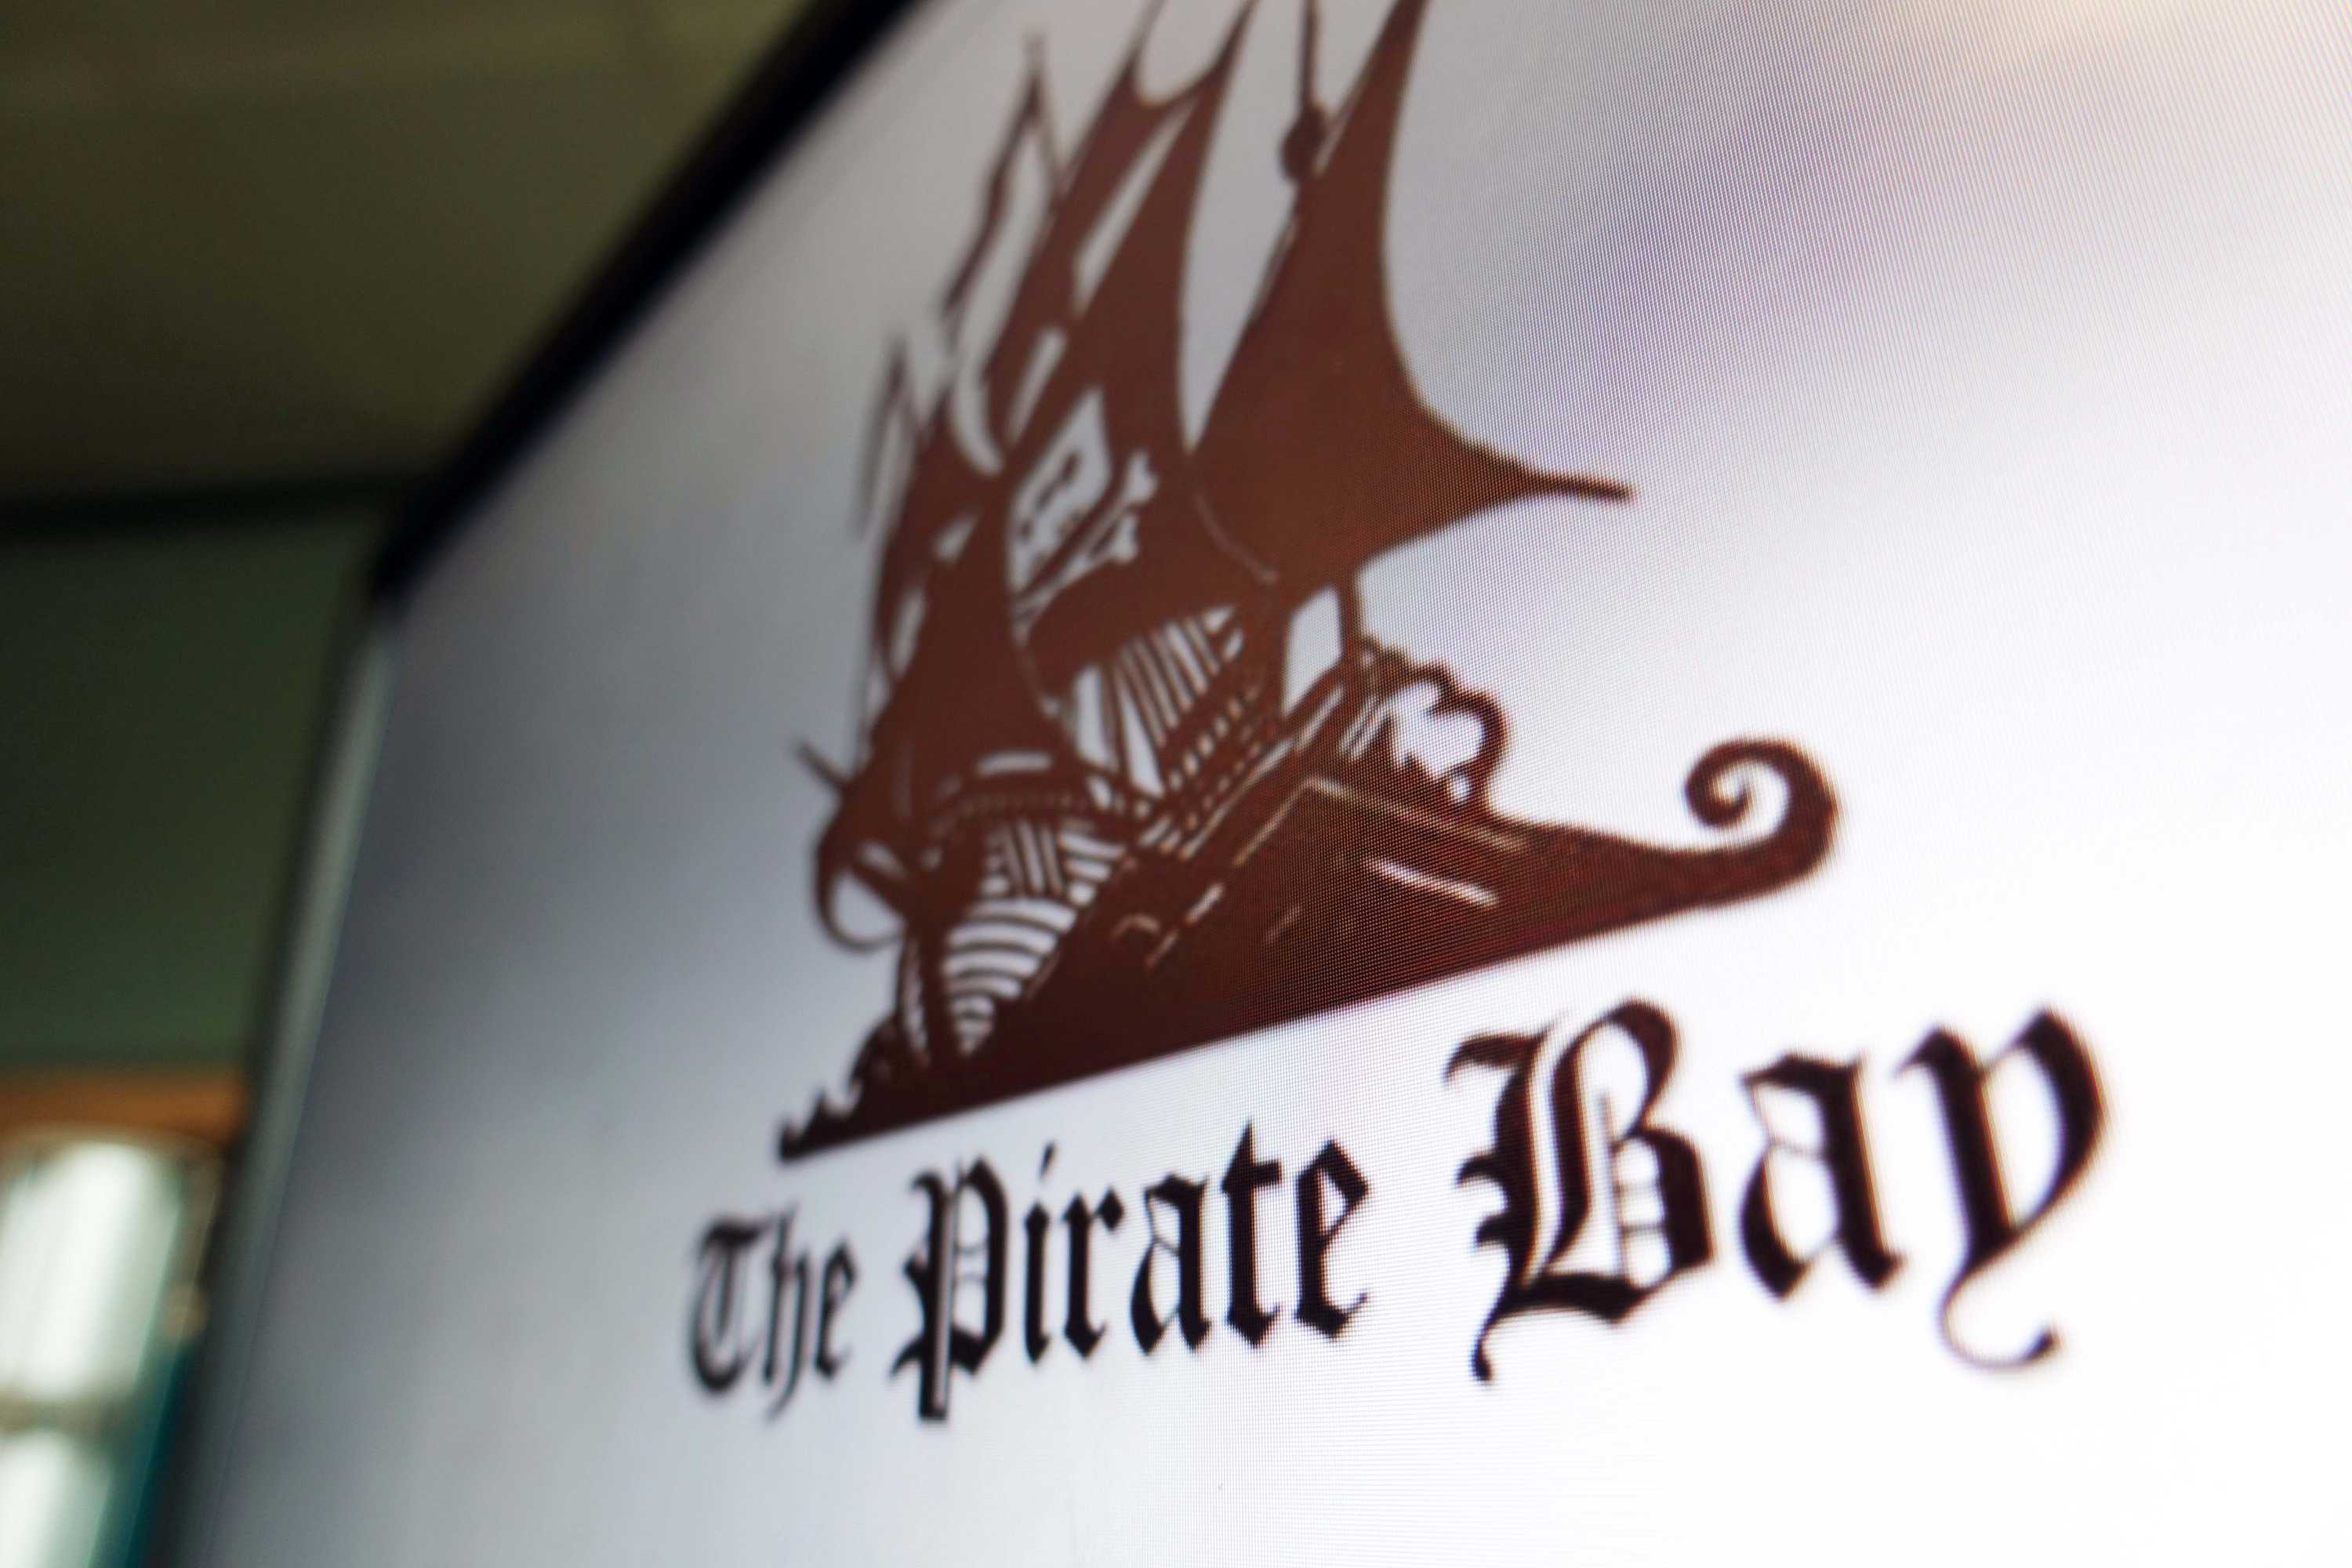 Internet companies forced to block The Pirate Bay, bittorrent websites in  Australia, Federal Court rules - ABC News